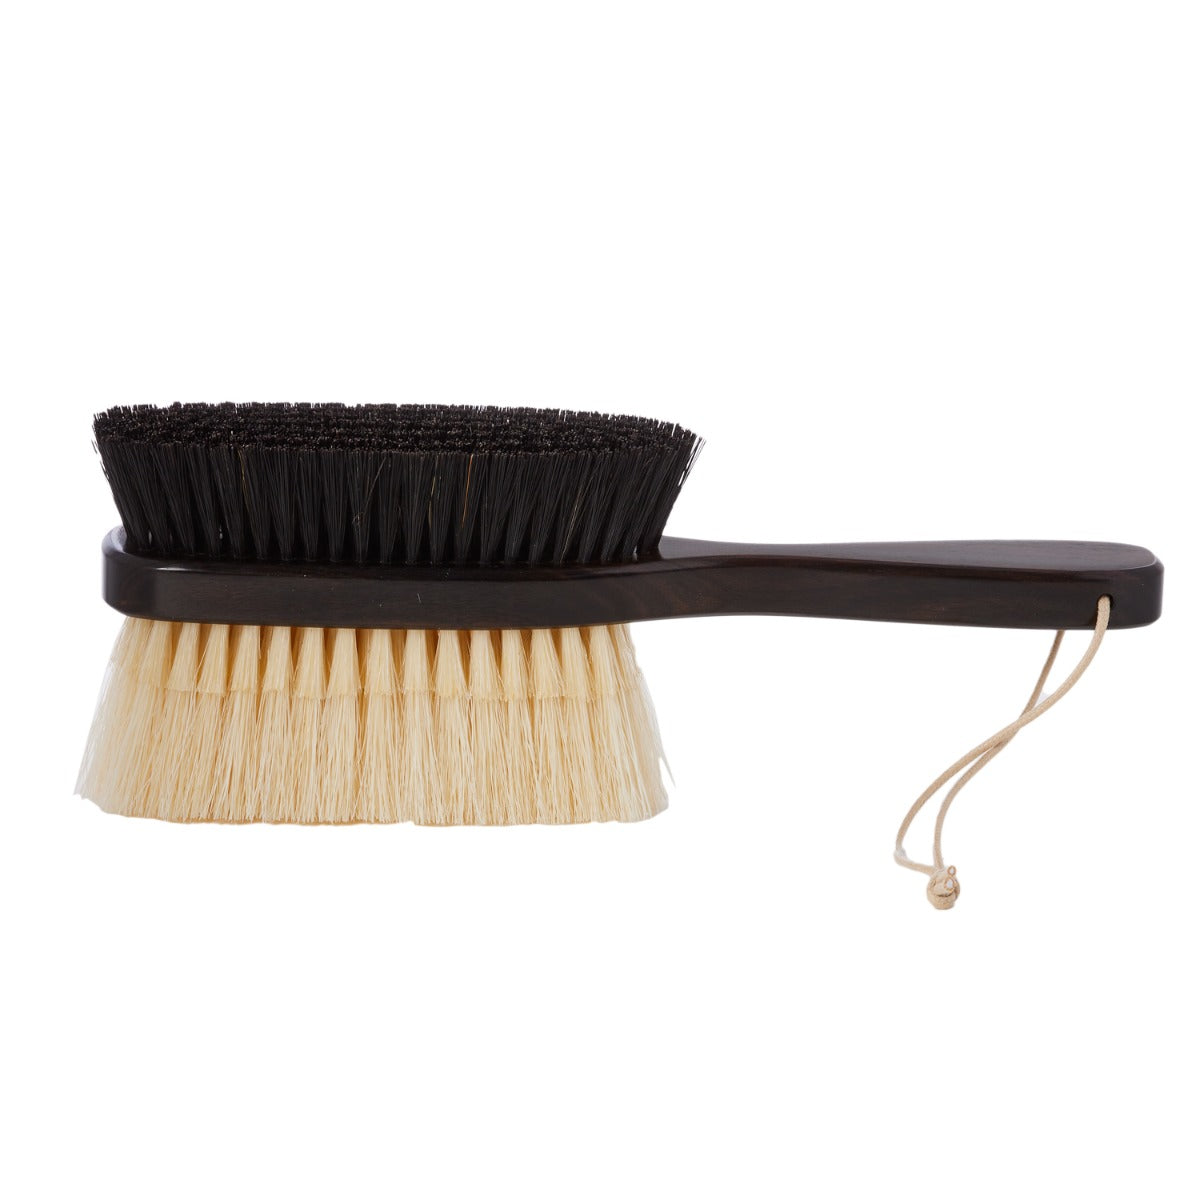 A KirbyAllison.com Ebony Deluxe Double-Sided Garment Brush with natural-bristled garment brushes on a white background.